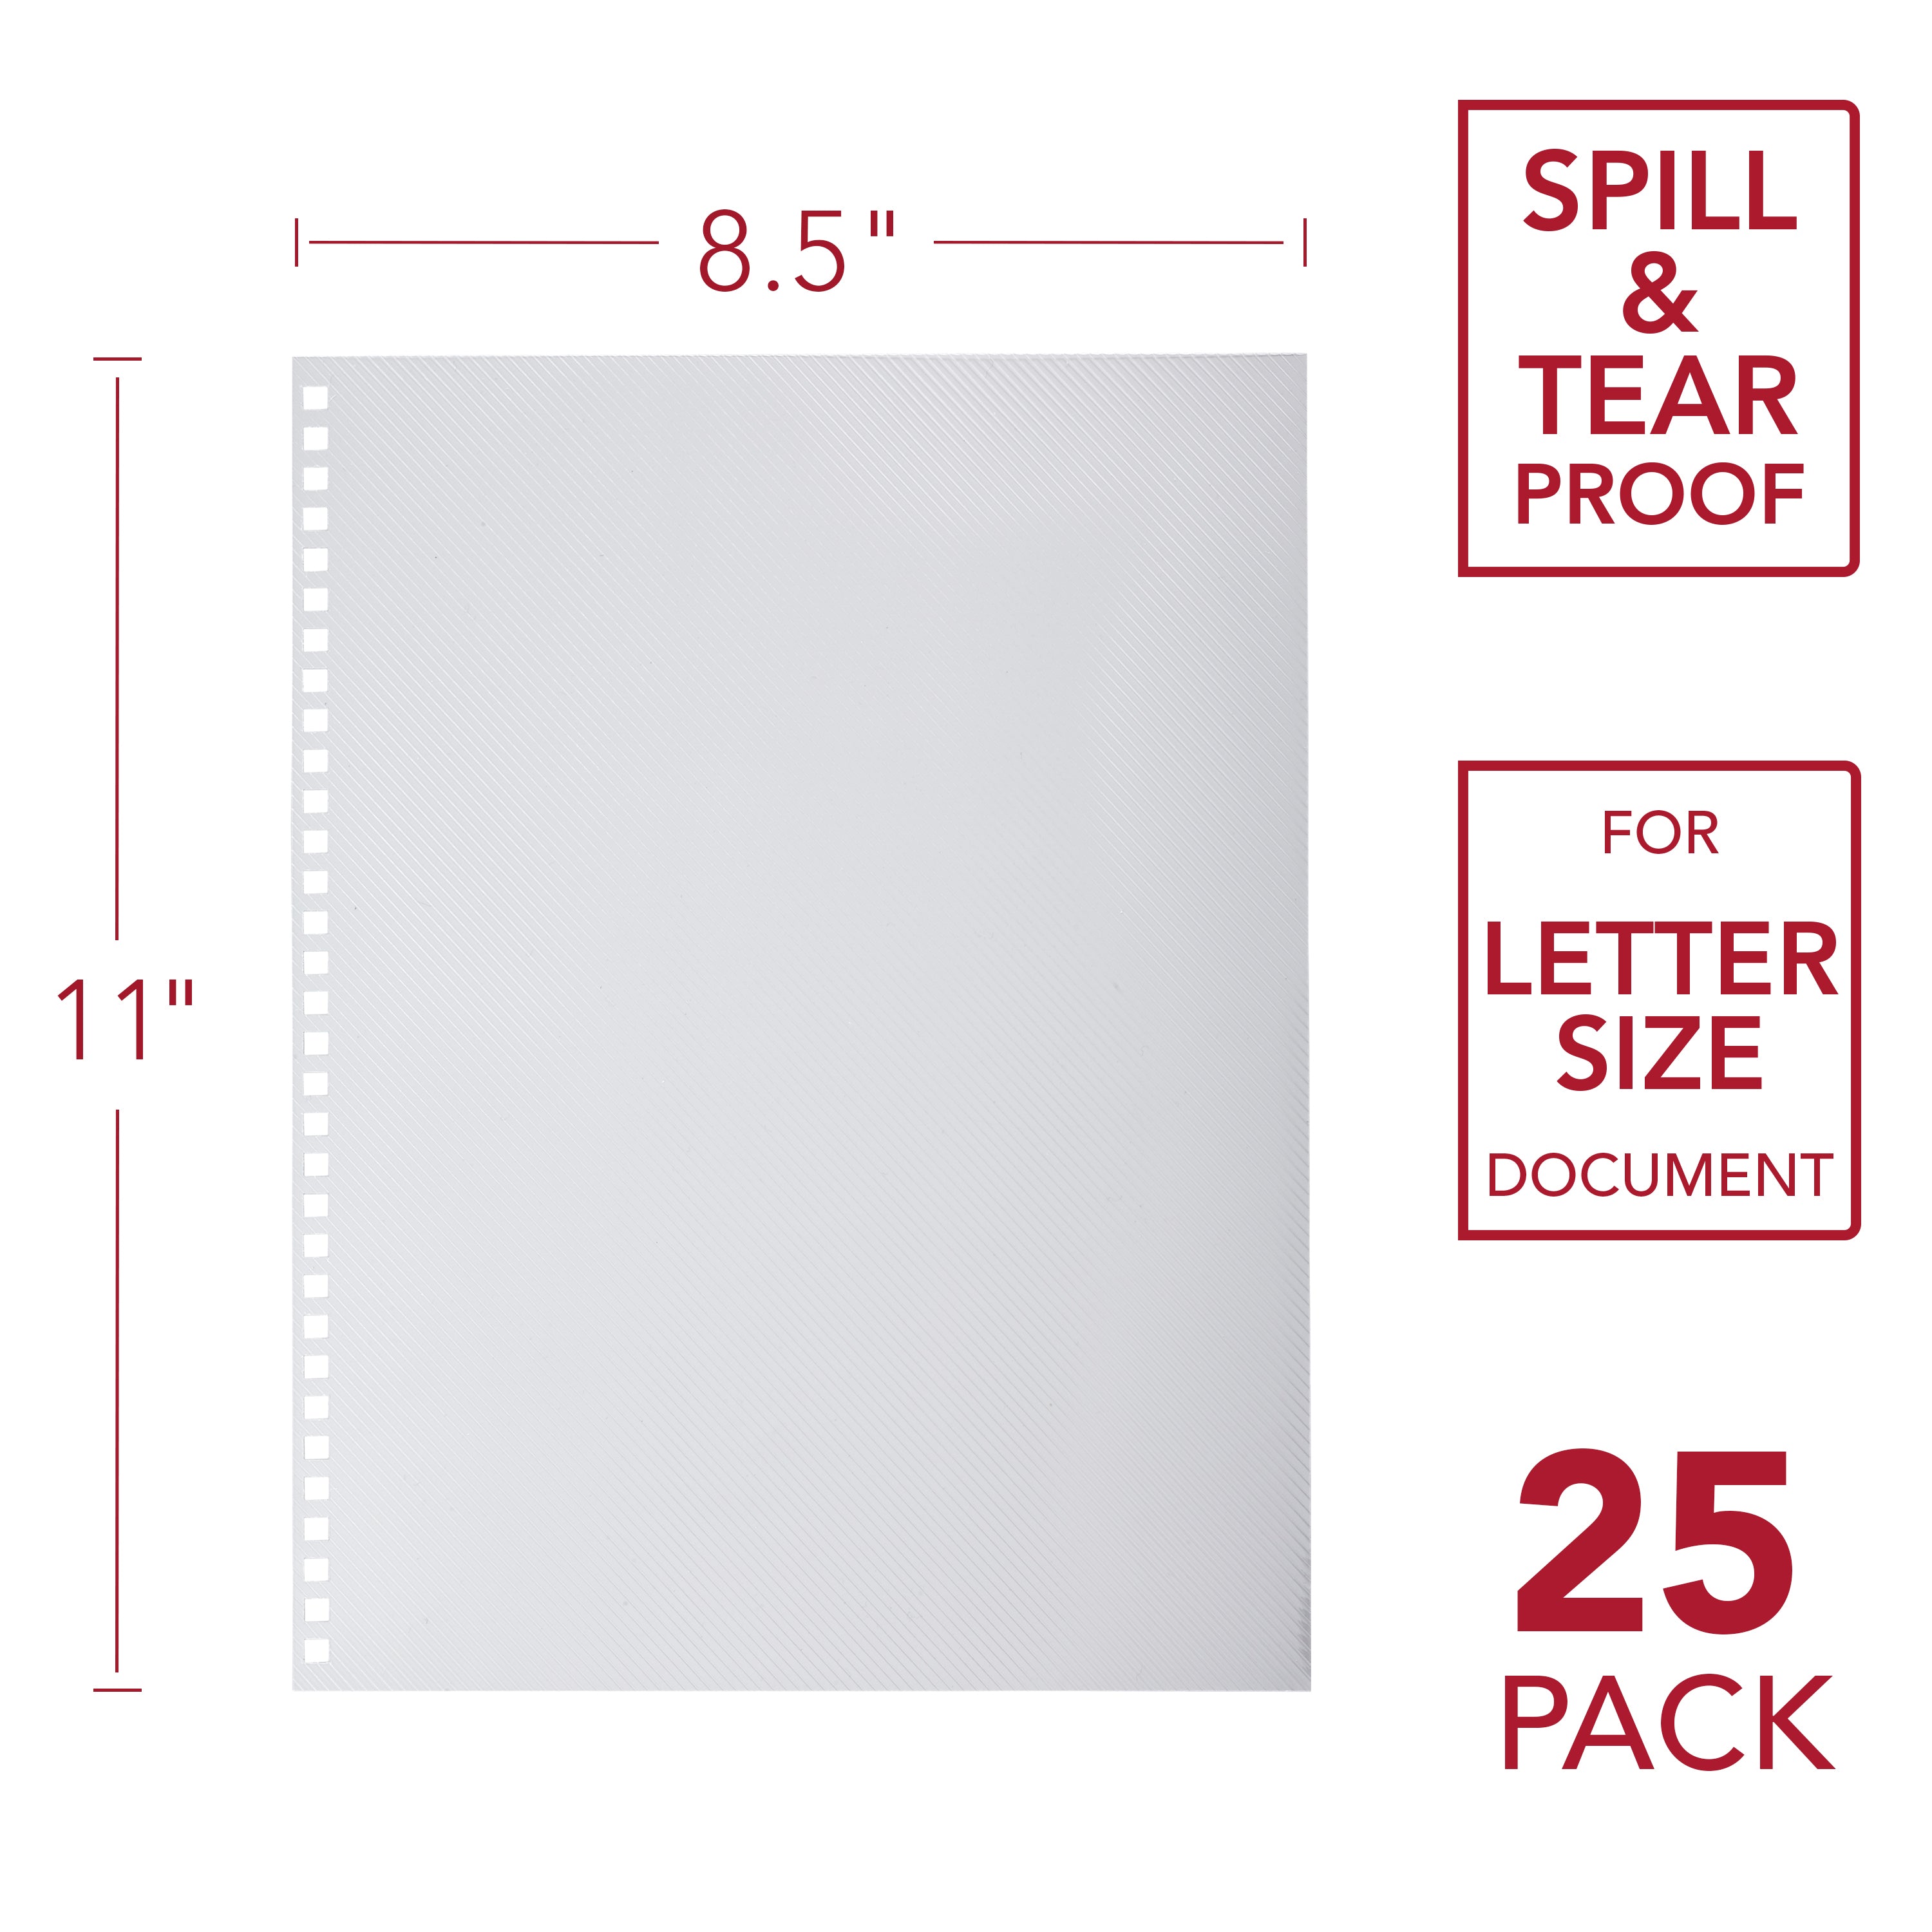 GBC ProClick Binding Presentation Covers, Lined Design, 8 1/2" x 11" (25 Pack)